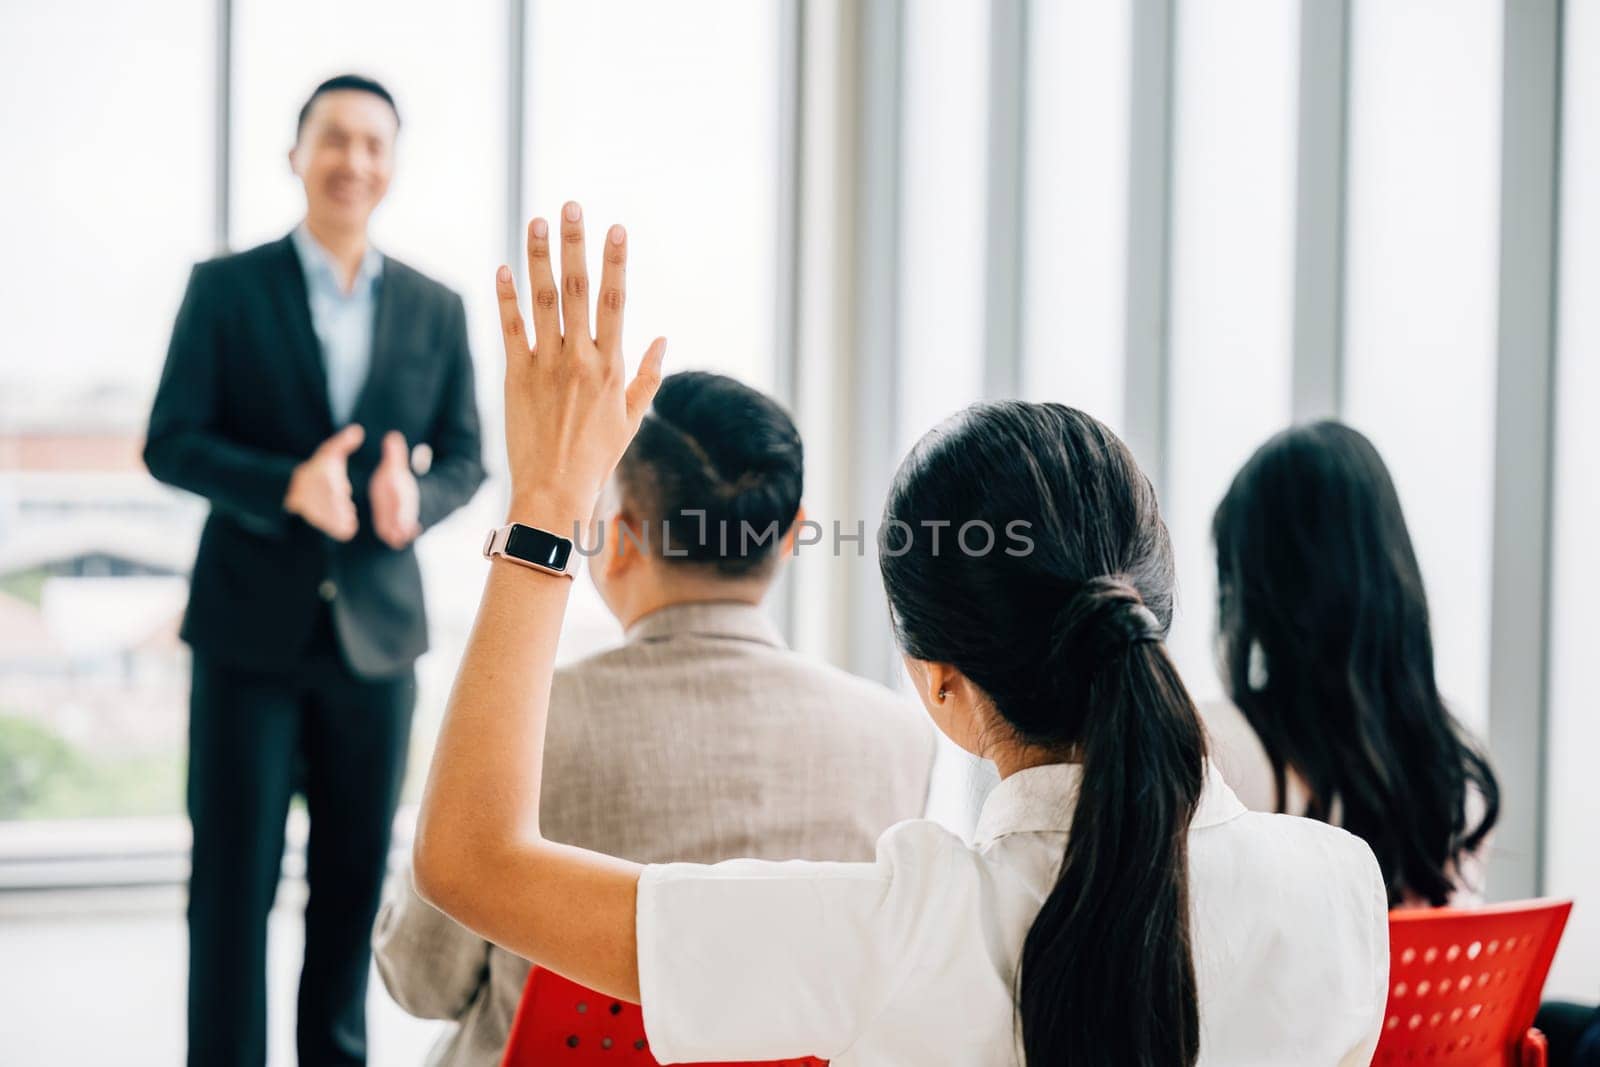 Audience engagement at a conference as hands are raised for questions, signifying the interactive nature of the meeting. A diverse group participates in a workshop or seminar presentation. by Sorapop